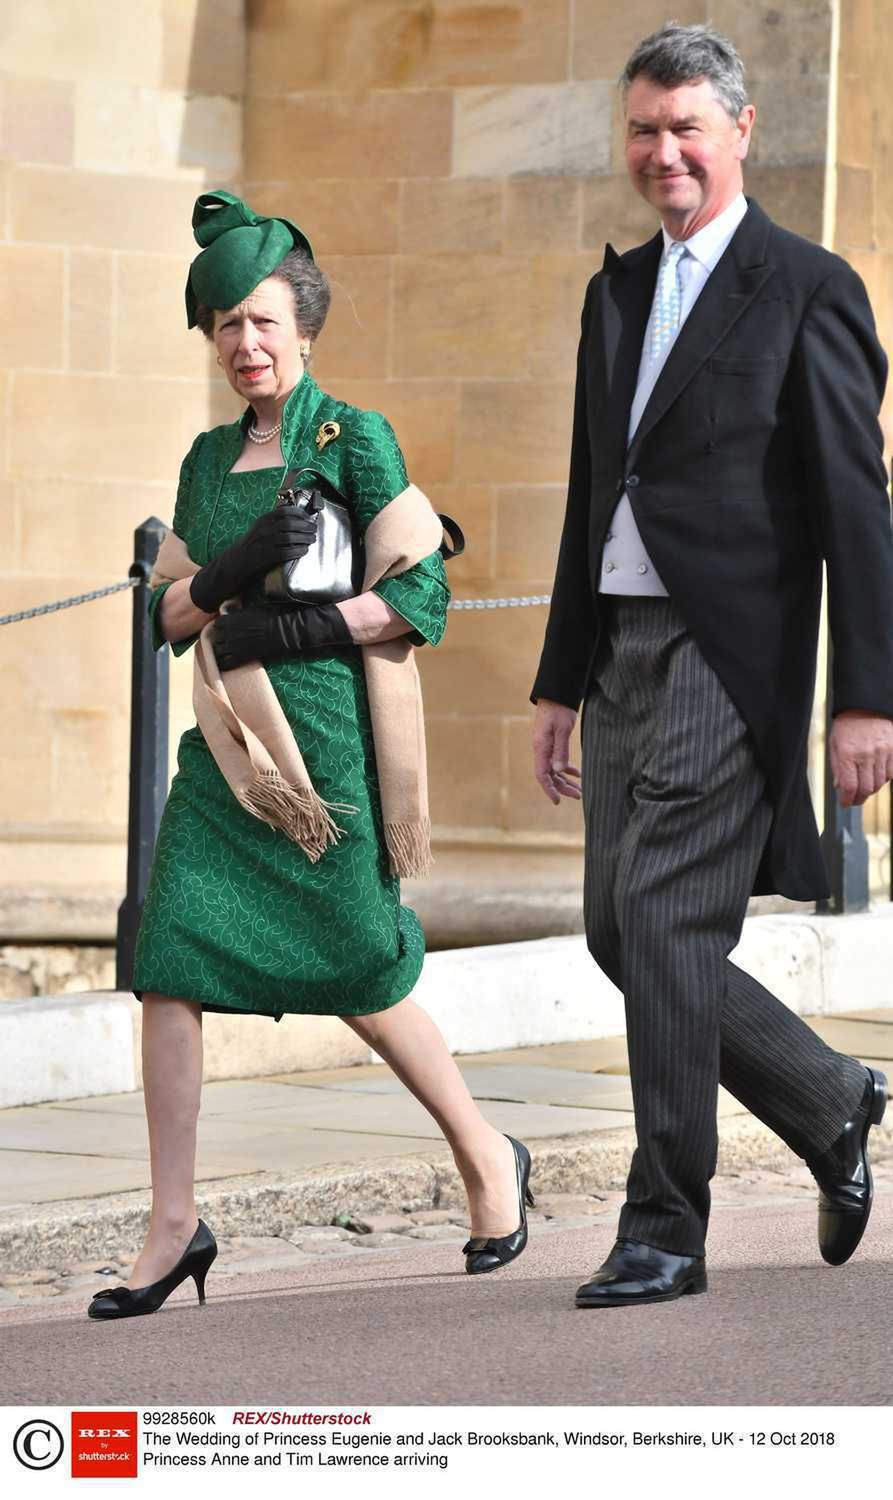 Mandatory Credit: Photo by REX/Shutterstock (9928560k)  Princess Anne and Tim Lawrence arriving  The Wedding of Princess Eugenie and Jack Brooksbank, Windsor, Berkshire, UK - 12 Oct 2018